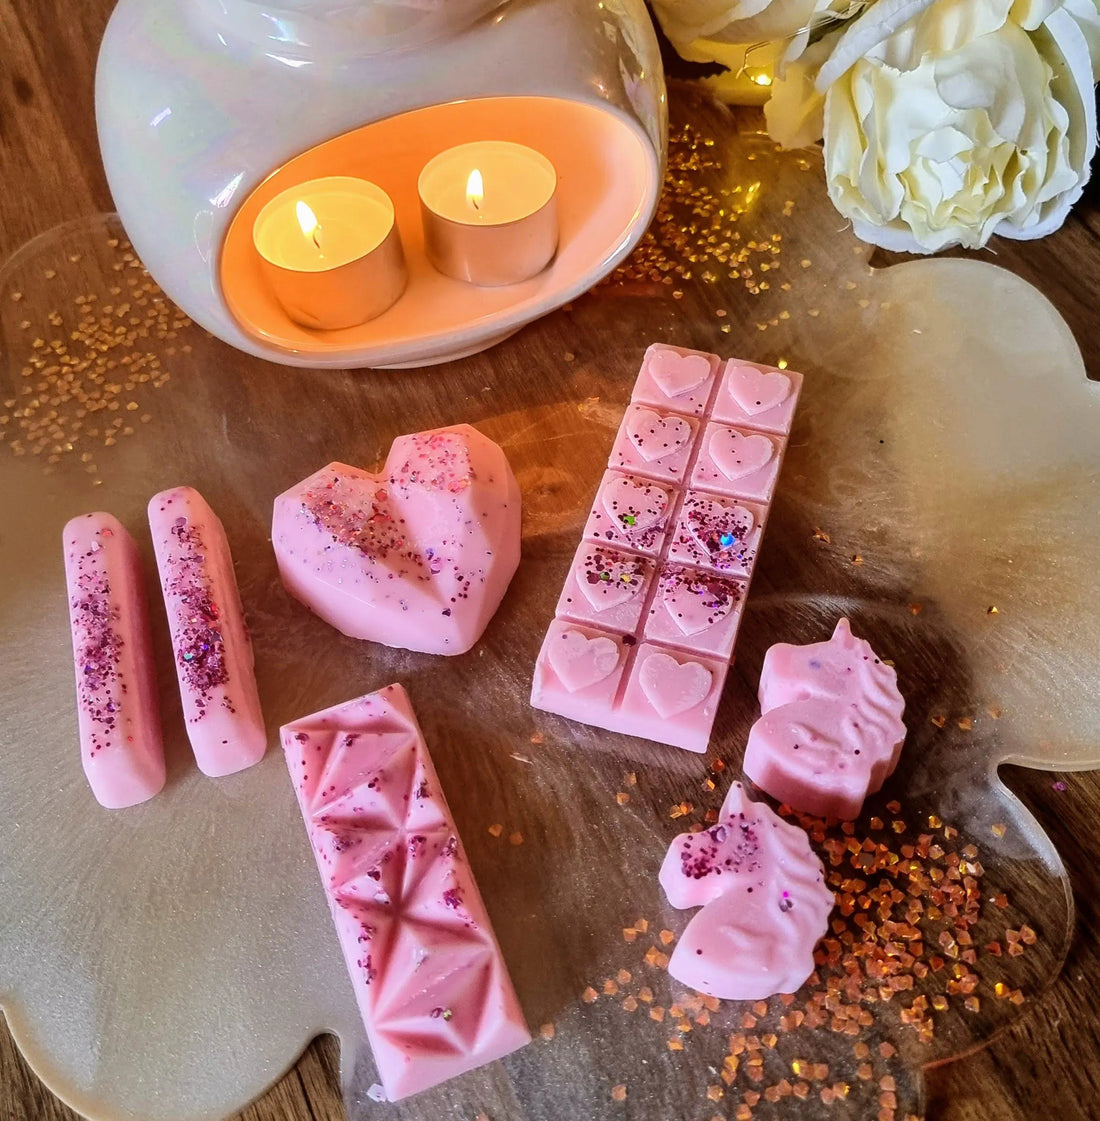 Why I Love Soy Wax Melts Scent Sational Wax melts